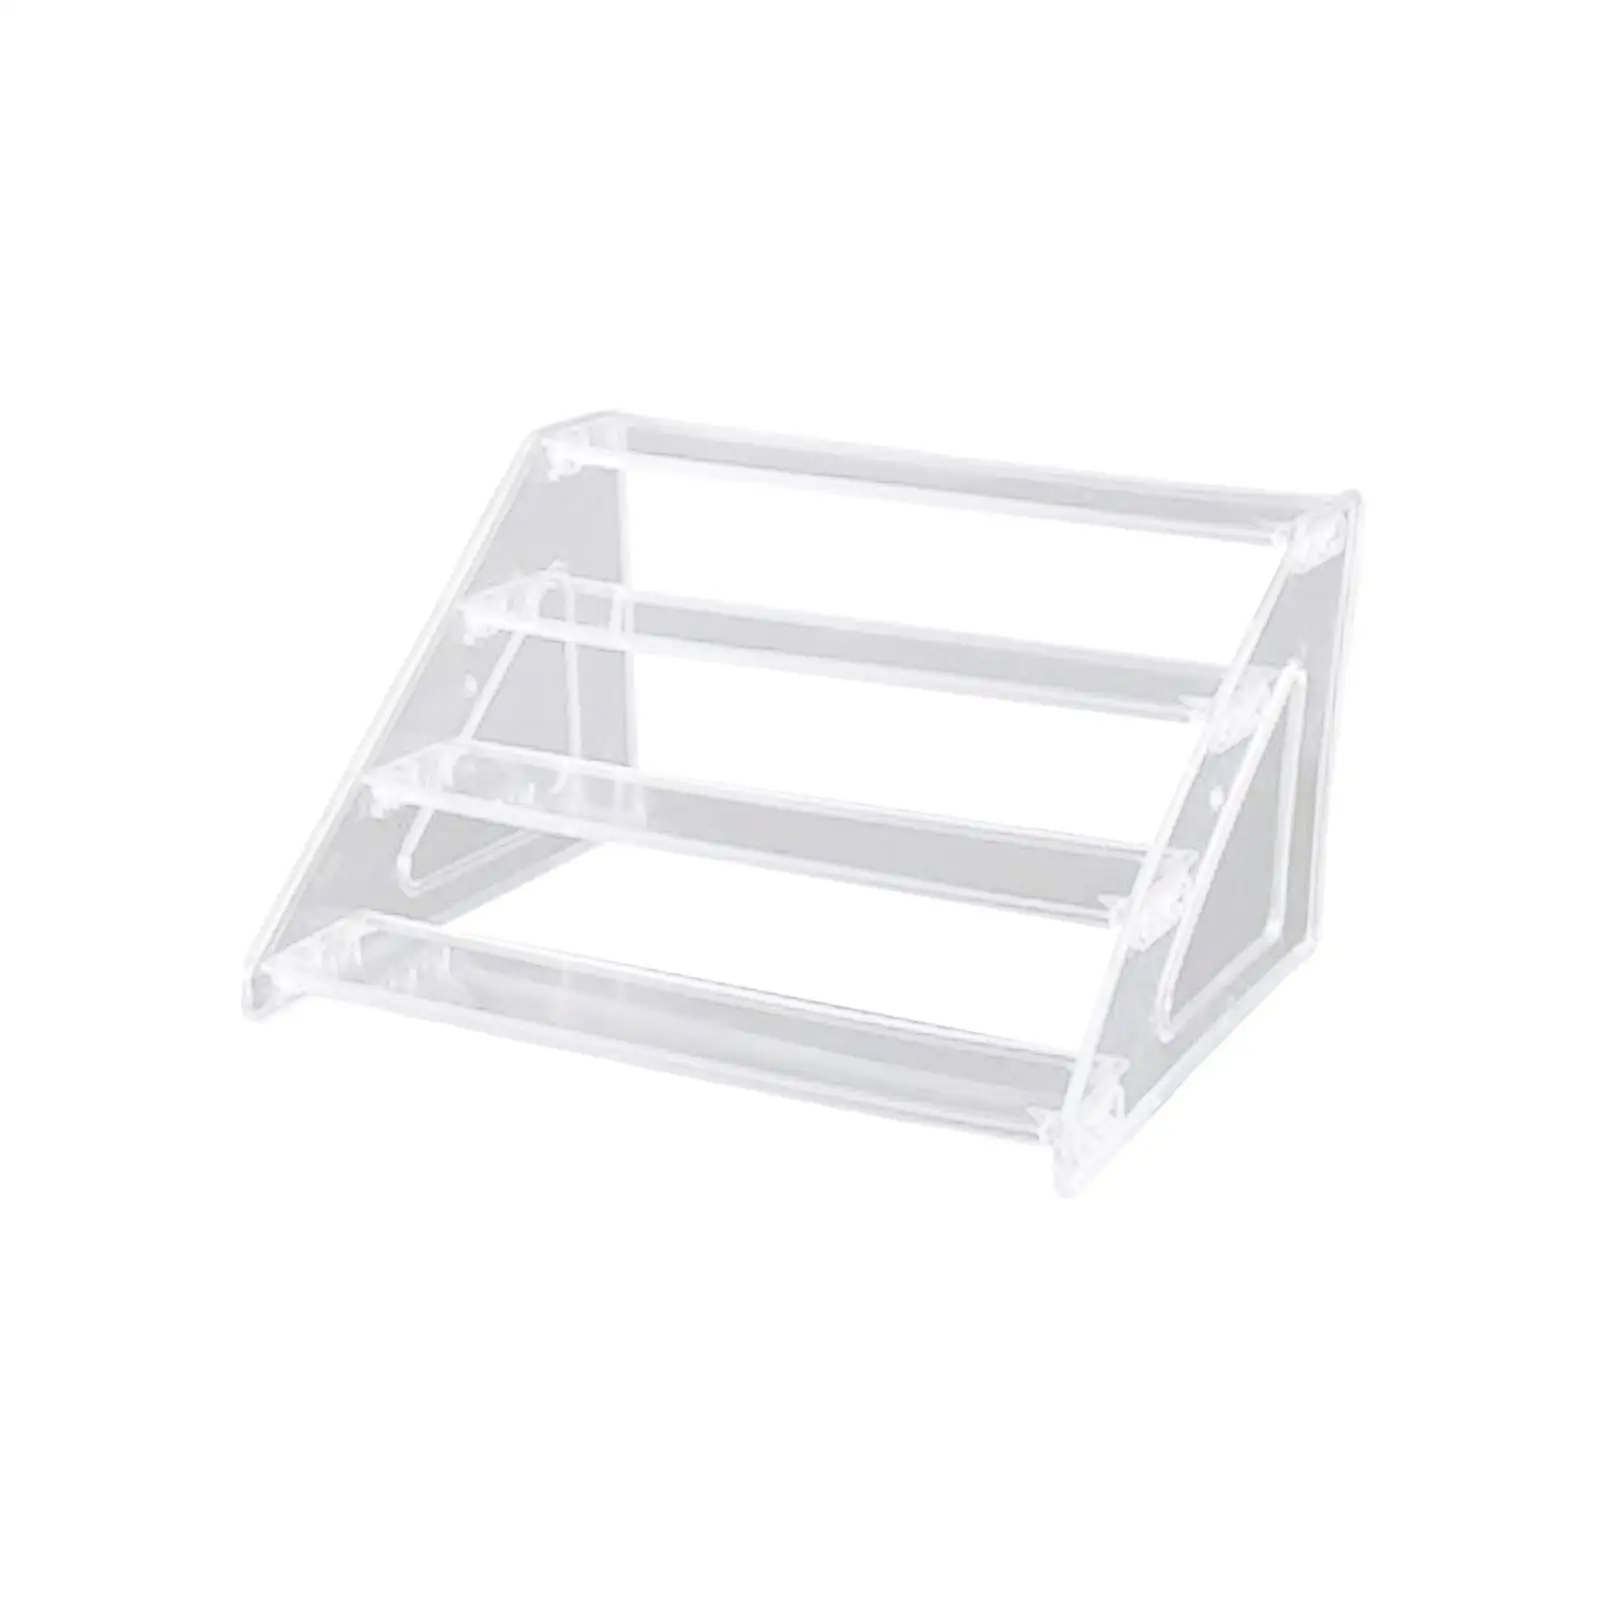 Acrylic Display Riser Storage Organizer Showcase Fixtures Cupcake Stand Practical for Dessert Toys Cosmetic Figure Dolls